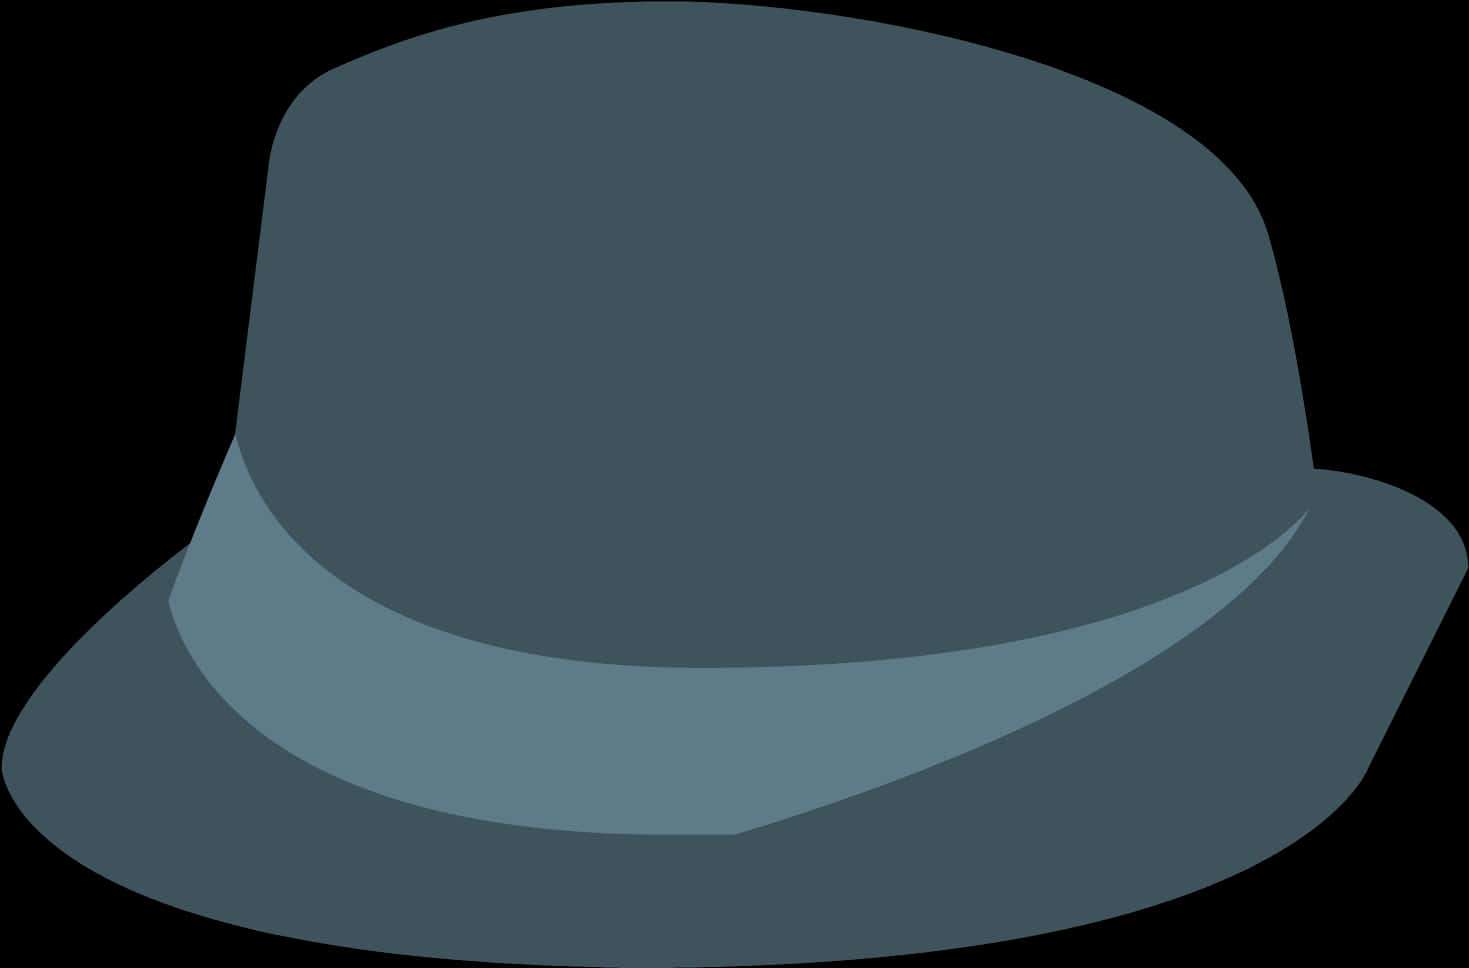 A Blue Hat With A Black Background